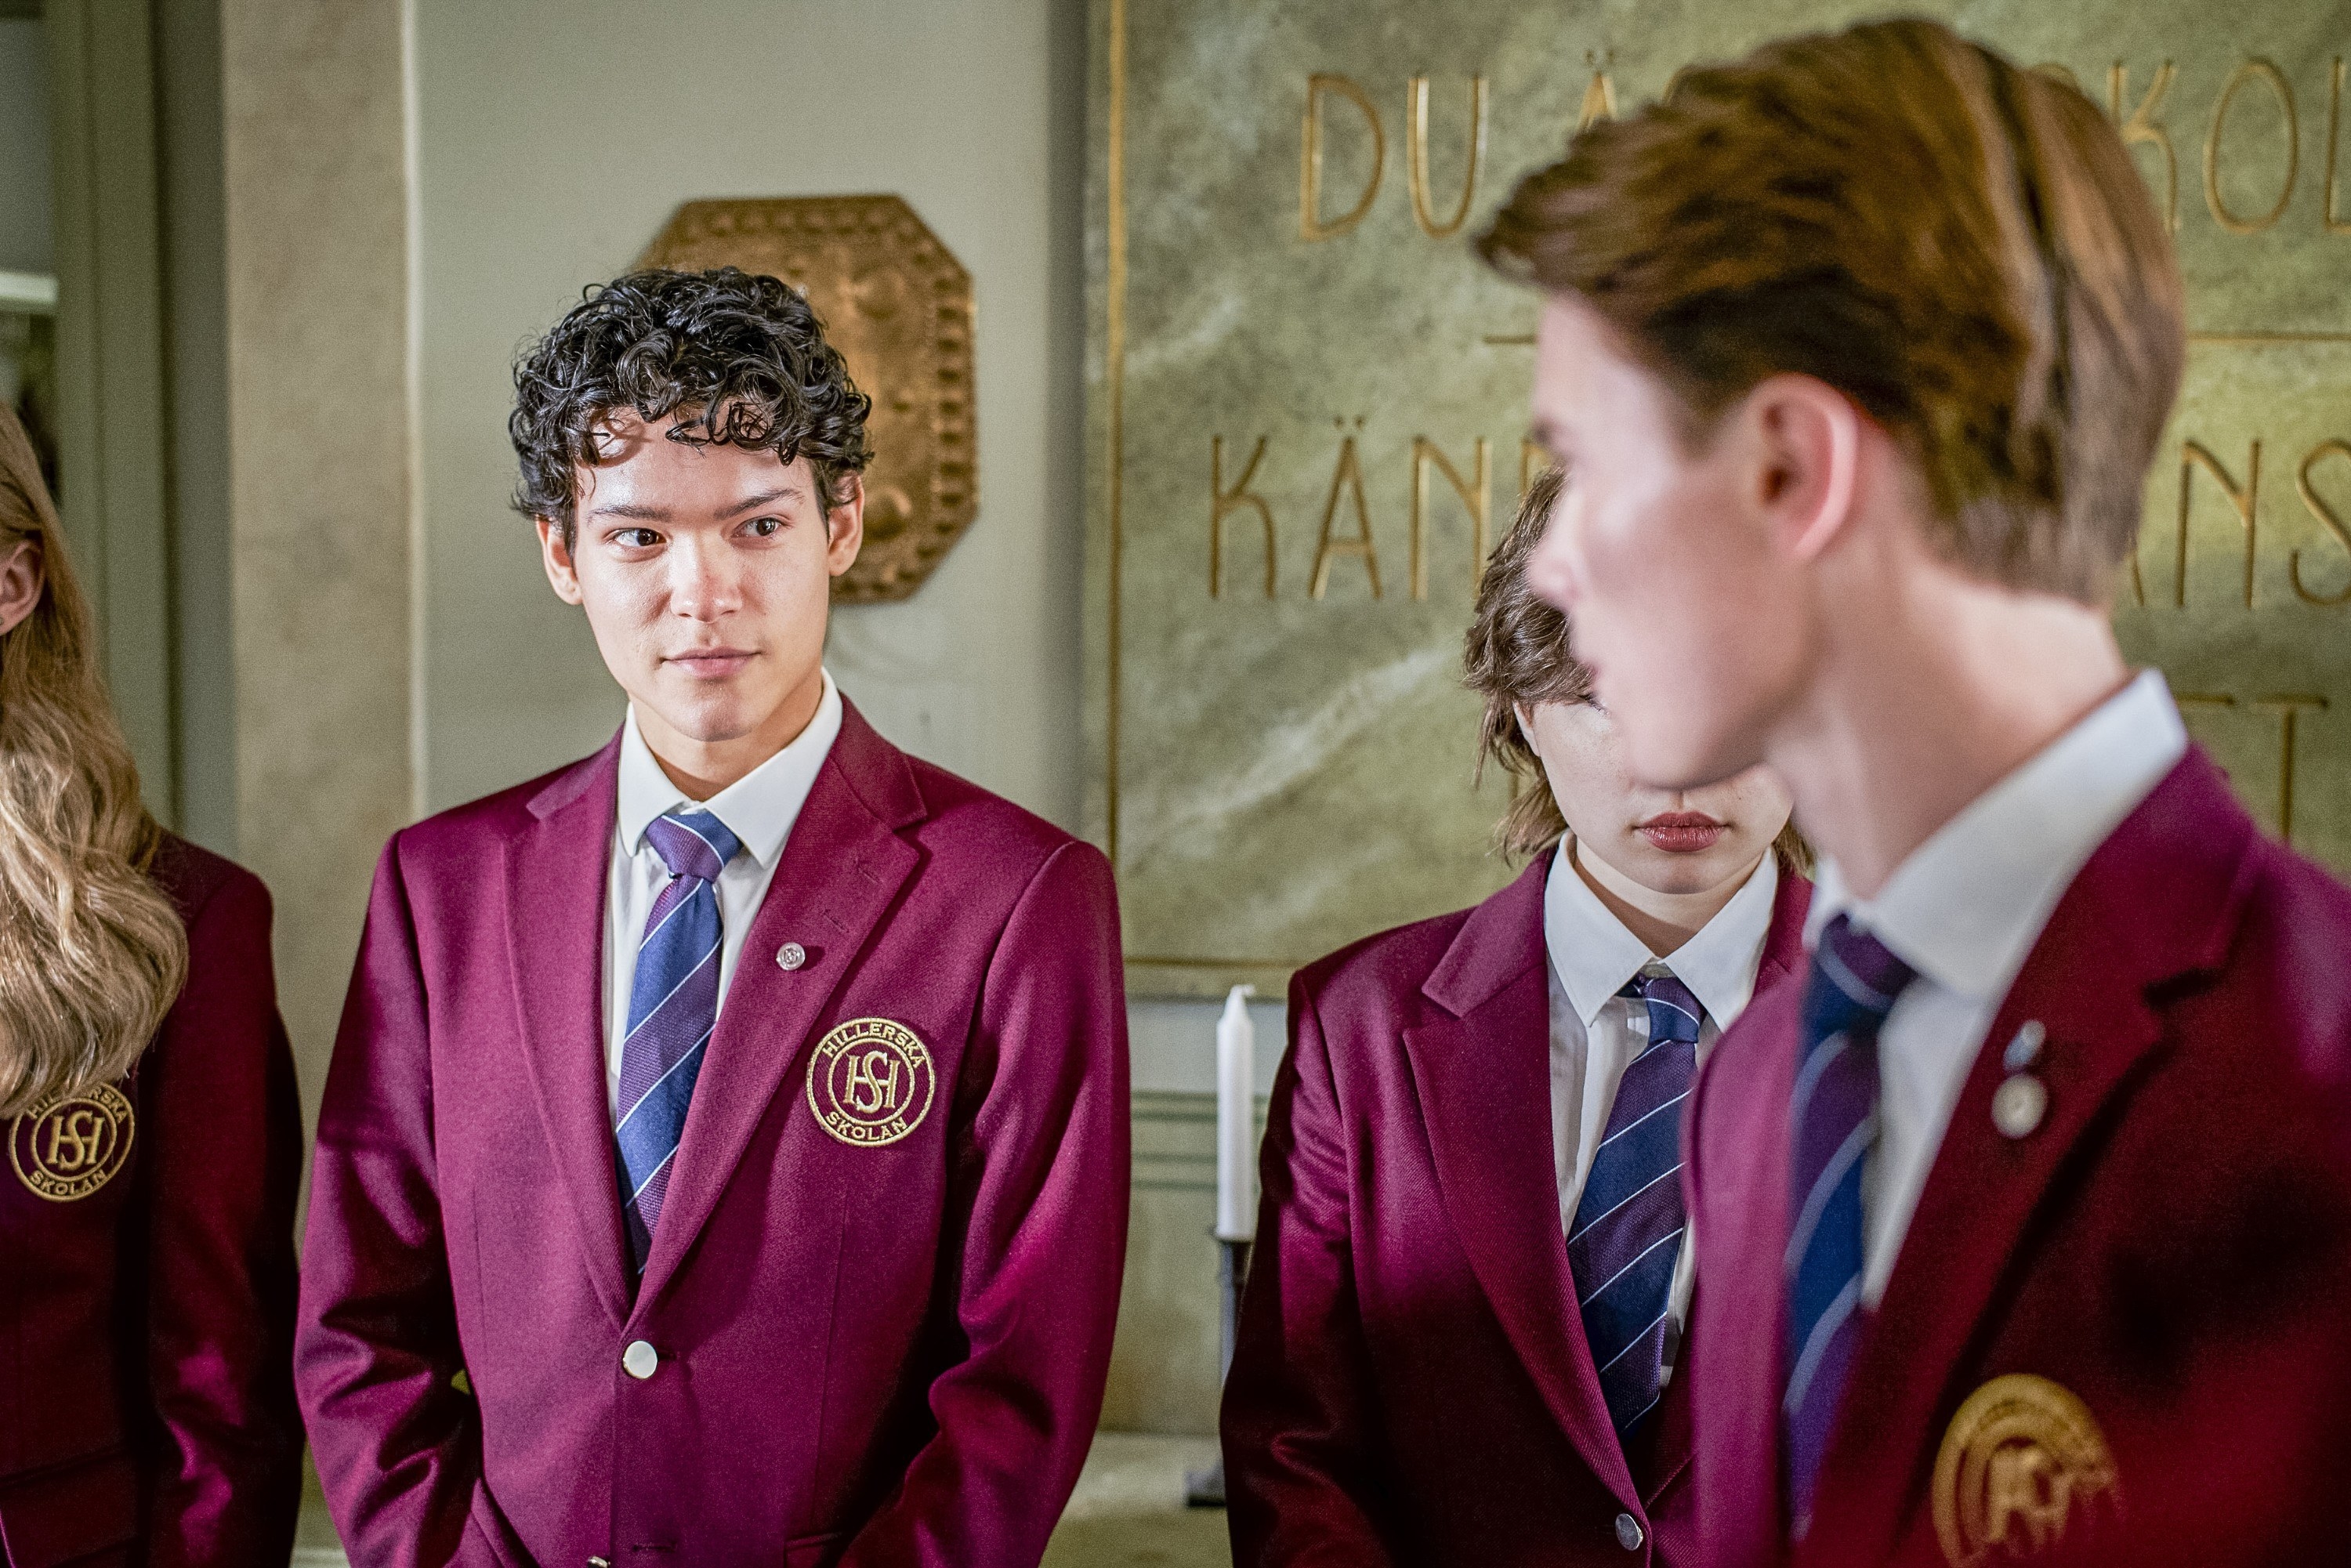 Omar Rudberg and Edvin Ryding look at each other in Young Royals. They both wear school uniforms.